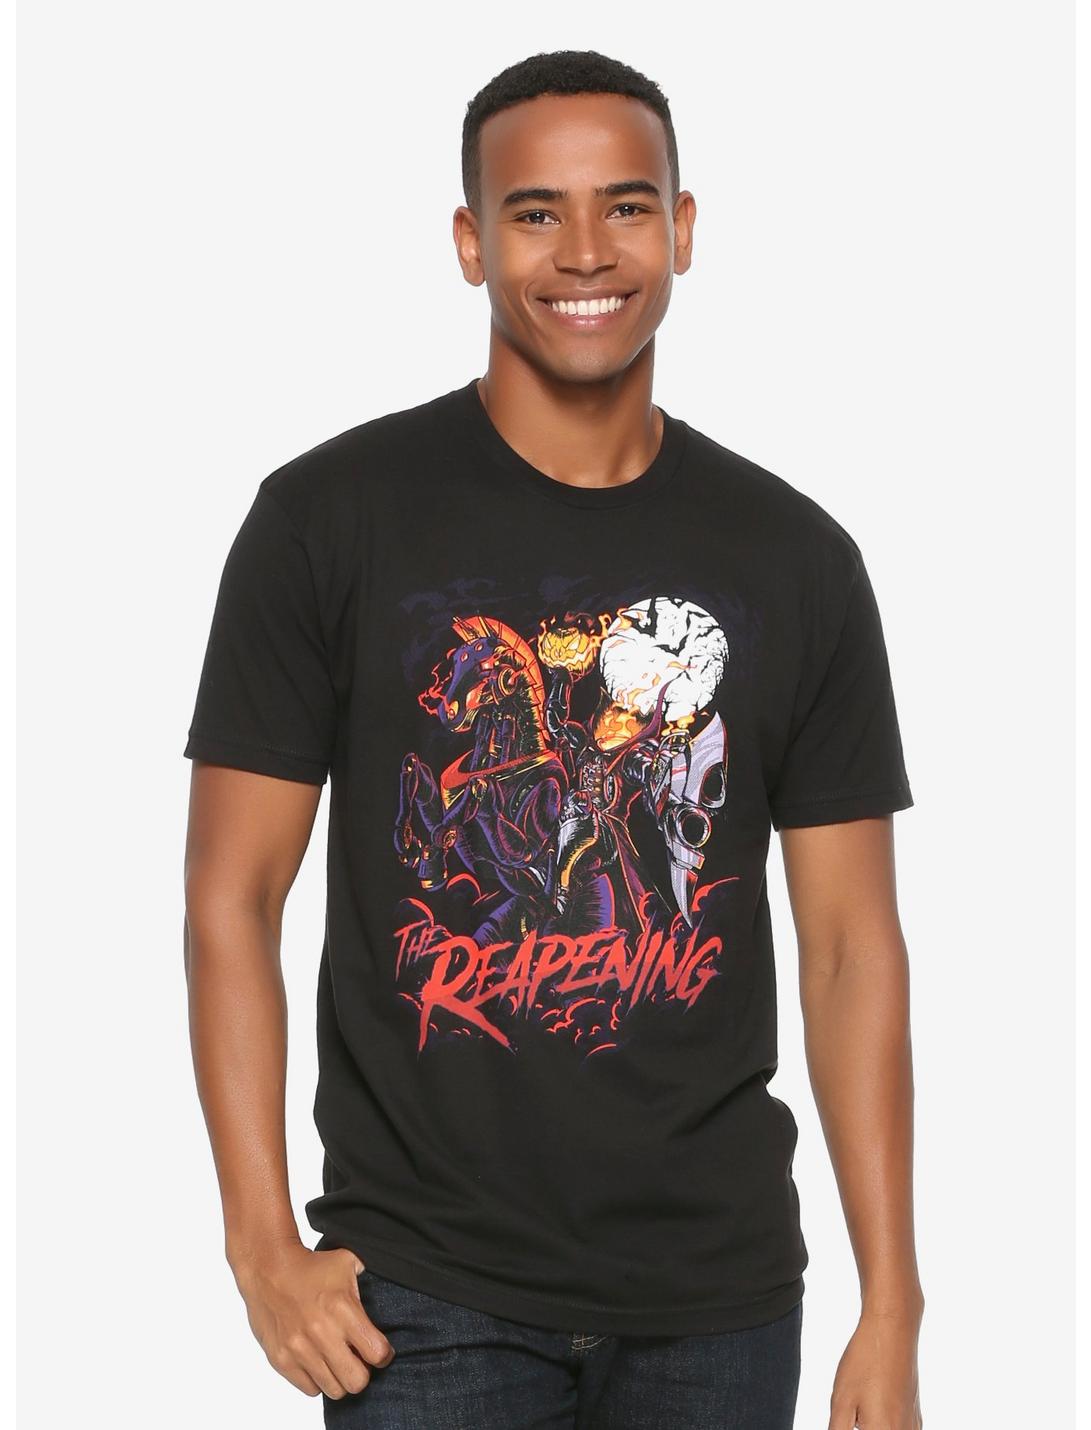 Overwatch The Reapening T-Shirt, BLACK, hi-res